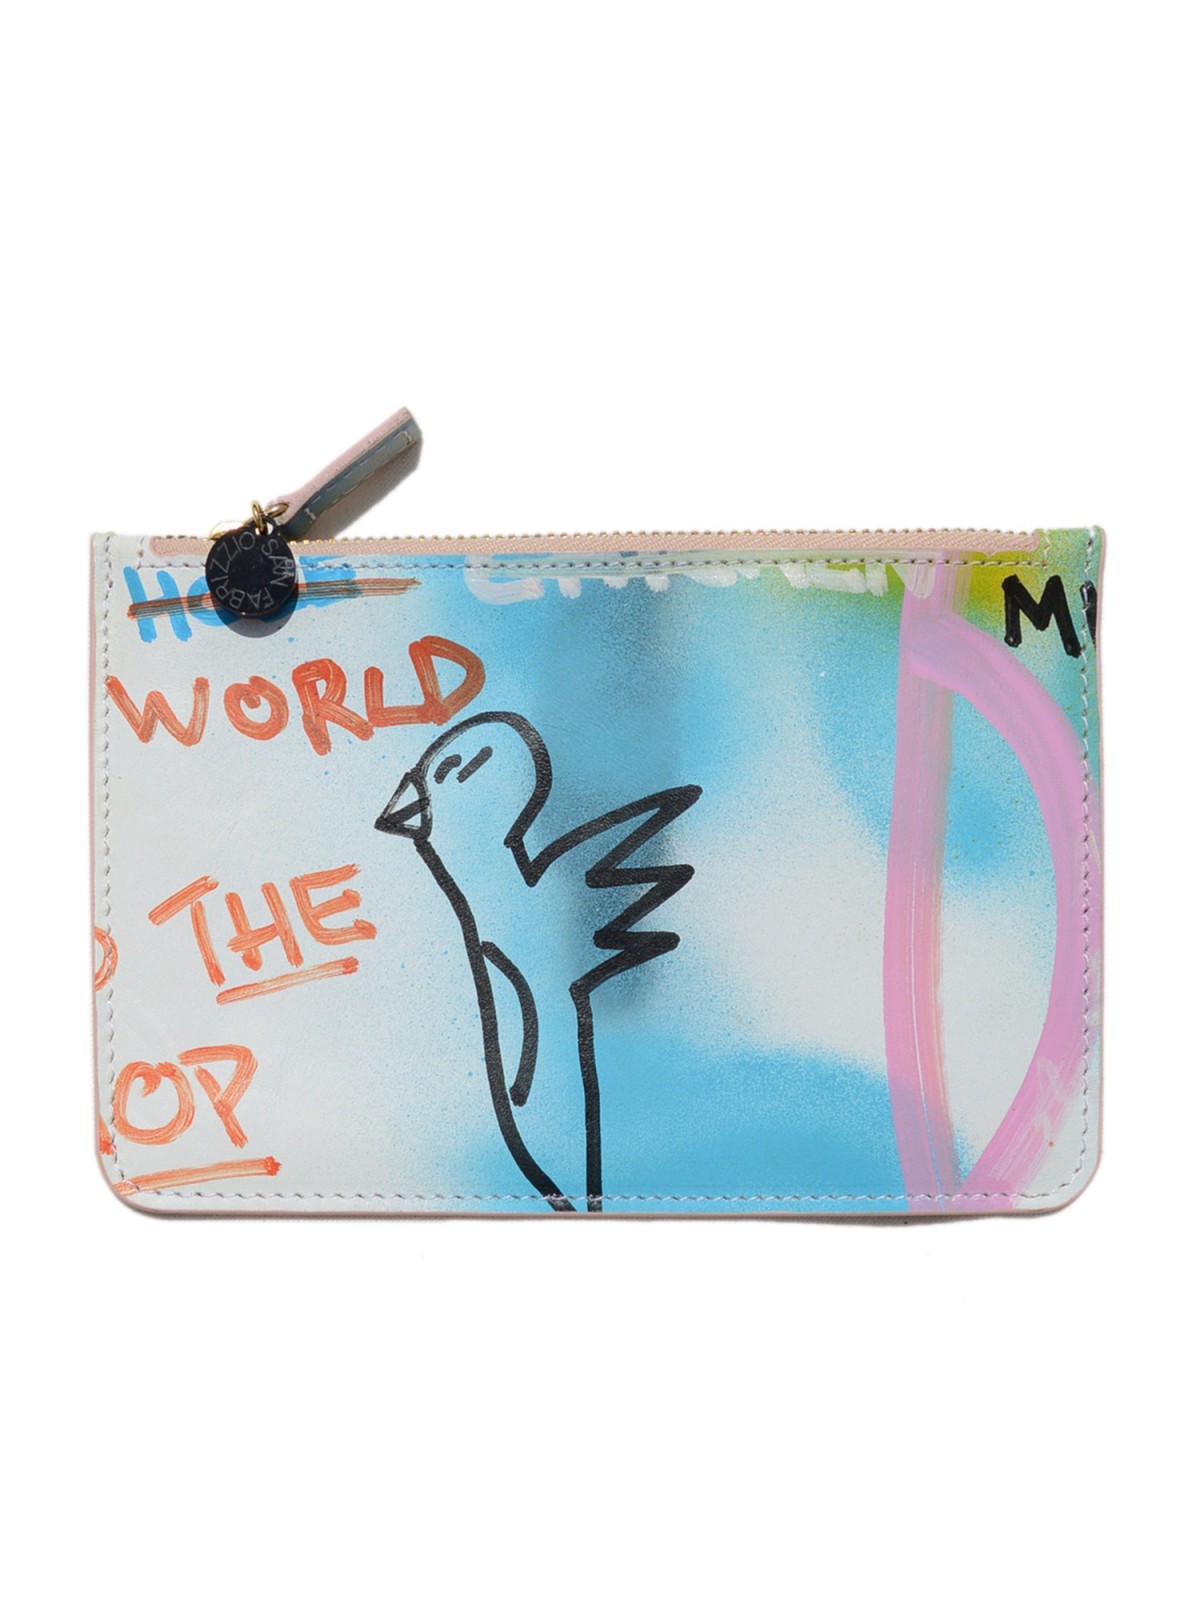 Pouch made in hand-painted leather